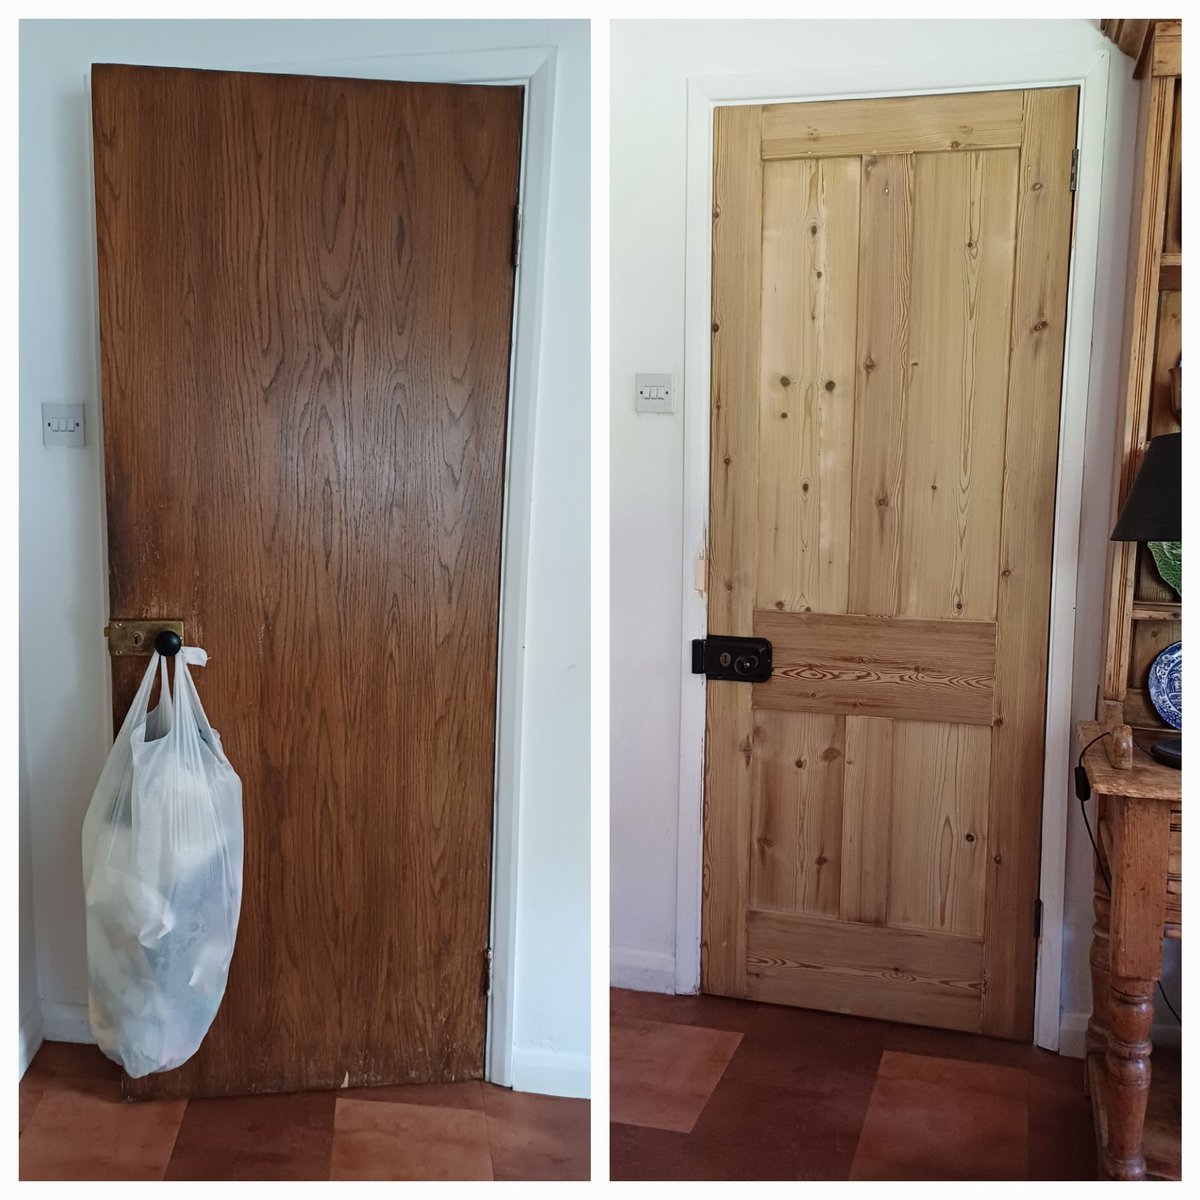 Another 1 of 7 in all, supply & fit reclaimed Victorian 4 panel doors for a 19th century village home. 
Replacing the 60's replacements and reinstating some period charm.
Client's quote: 'Transforming the space'. That'll do me!
Hope they find somewhere else for the rubbish! 😬